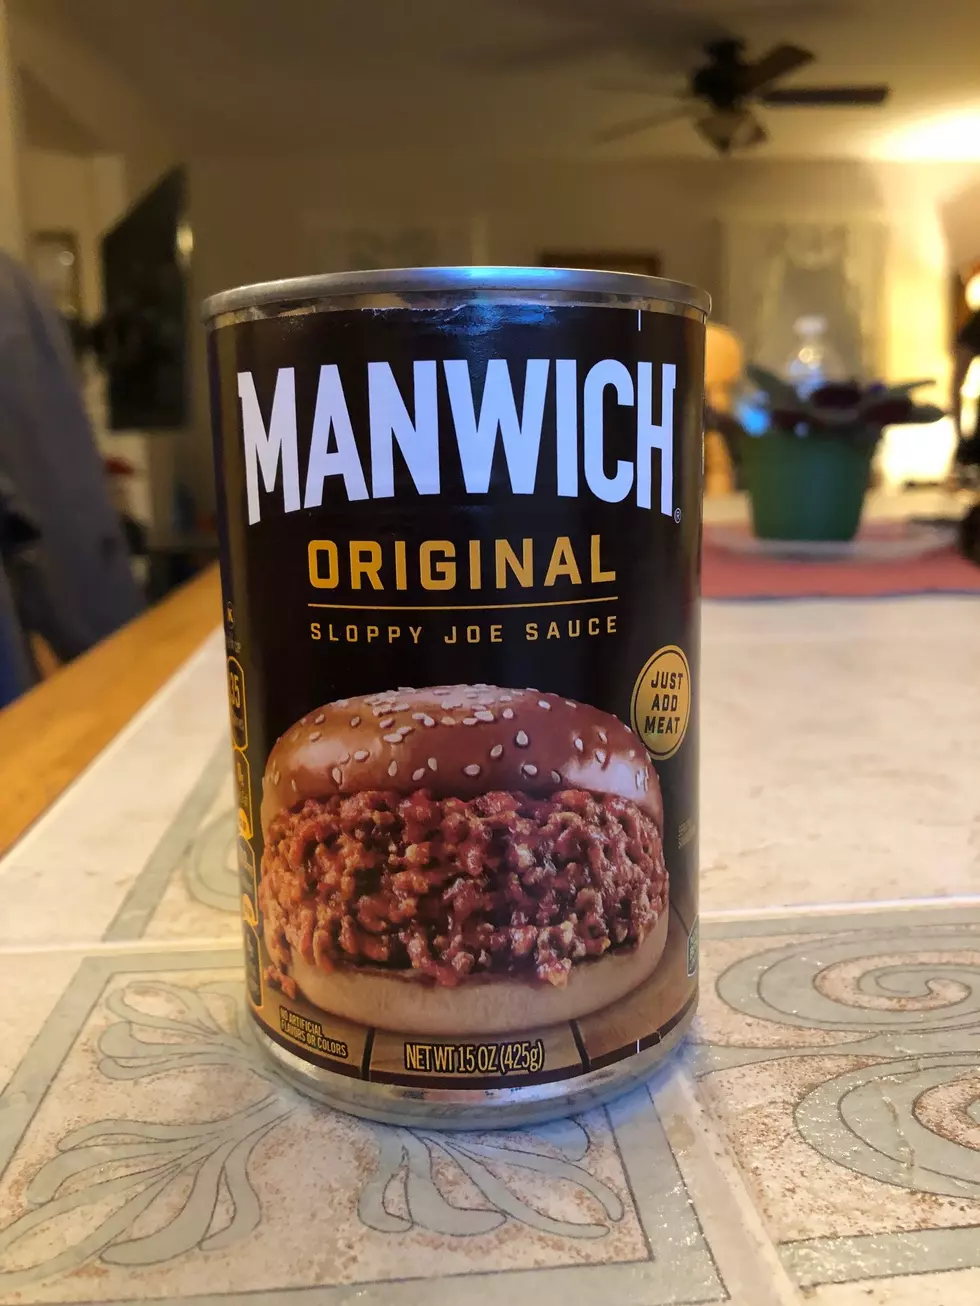 Is Manwich Sauce Sexist? Some Say Yes